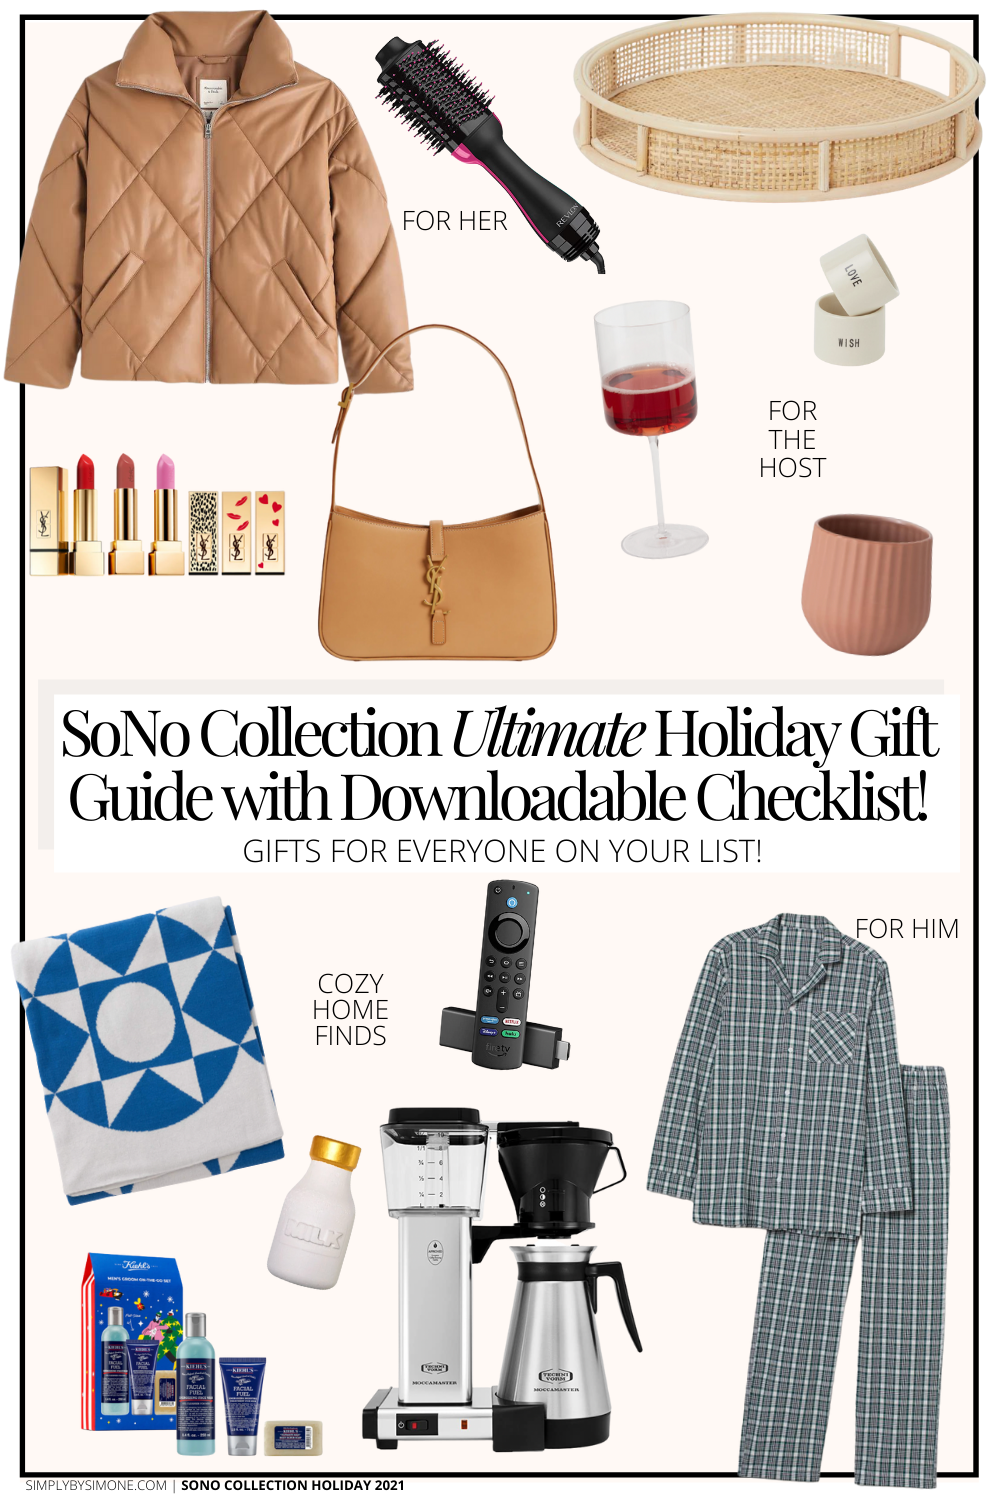 https://simplybysimone.com/wp-content/uploads/2021/11/SoNo-Collection-Ultimate-Holiday-Gift-Guide-with-Downloadable-List.png